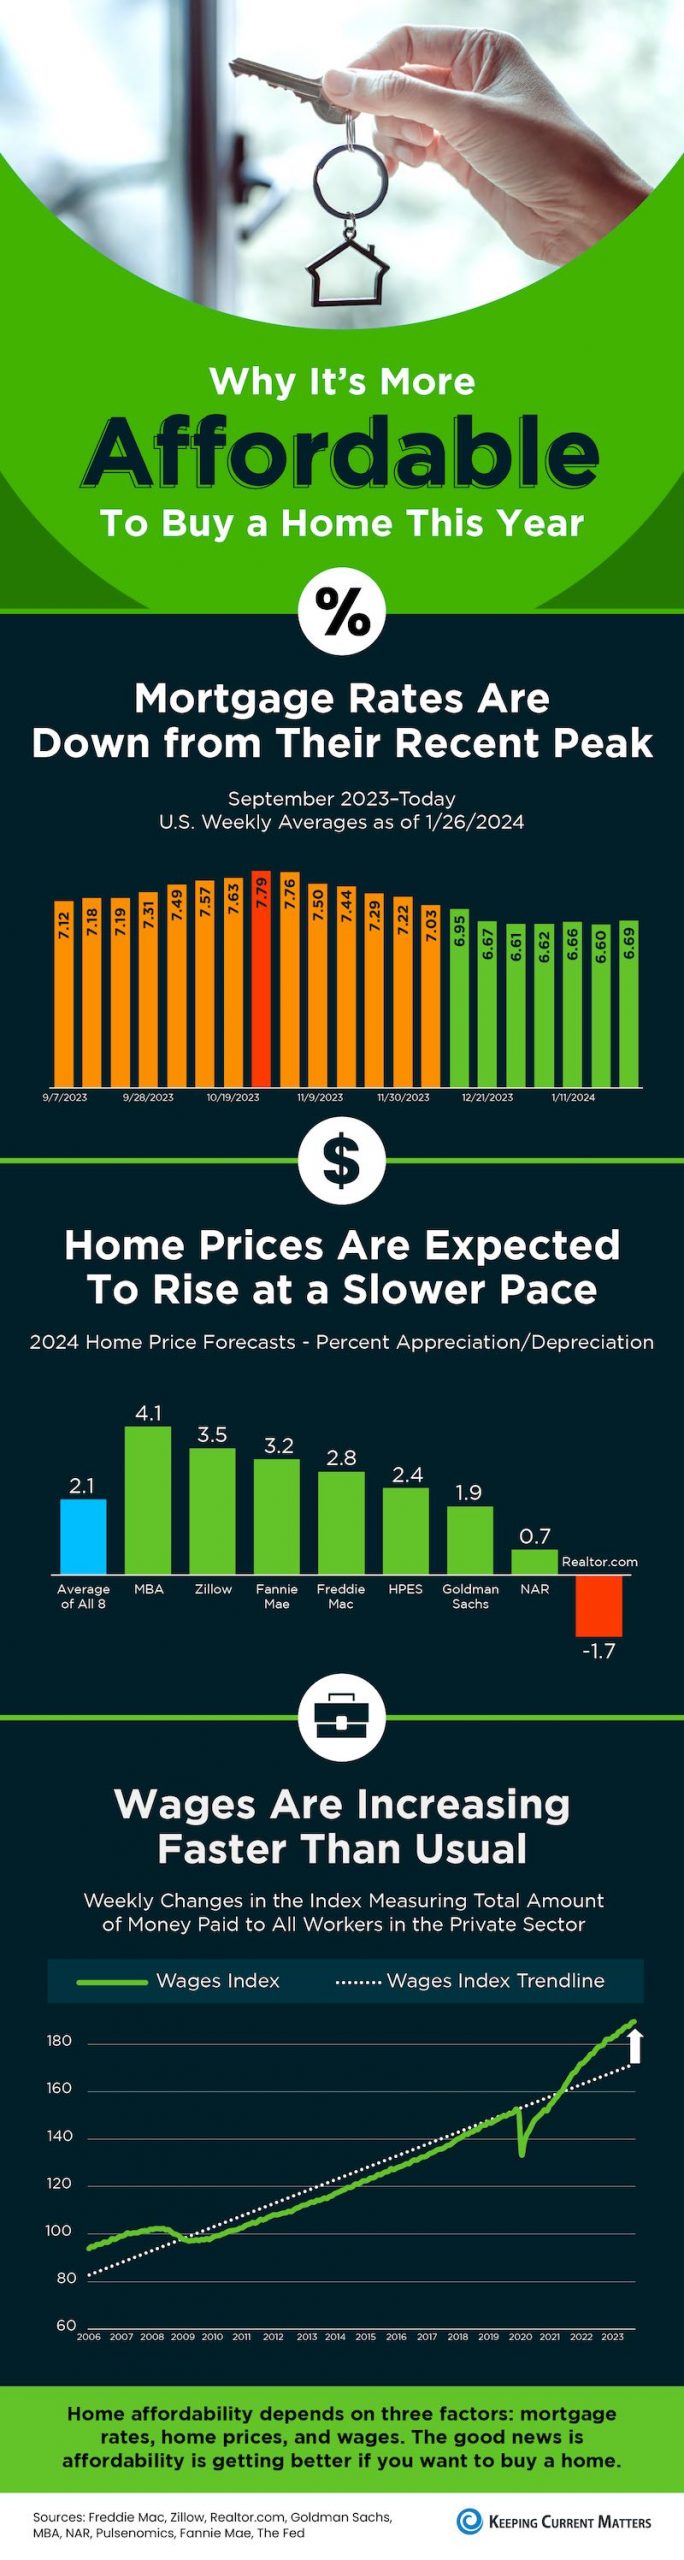 Why It’s More Affordable To Buy a Home This Year